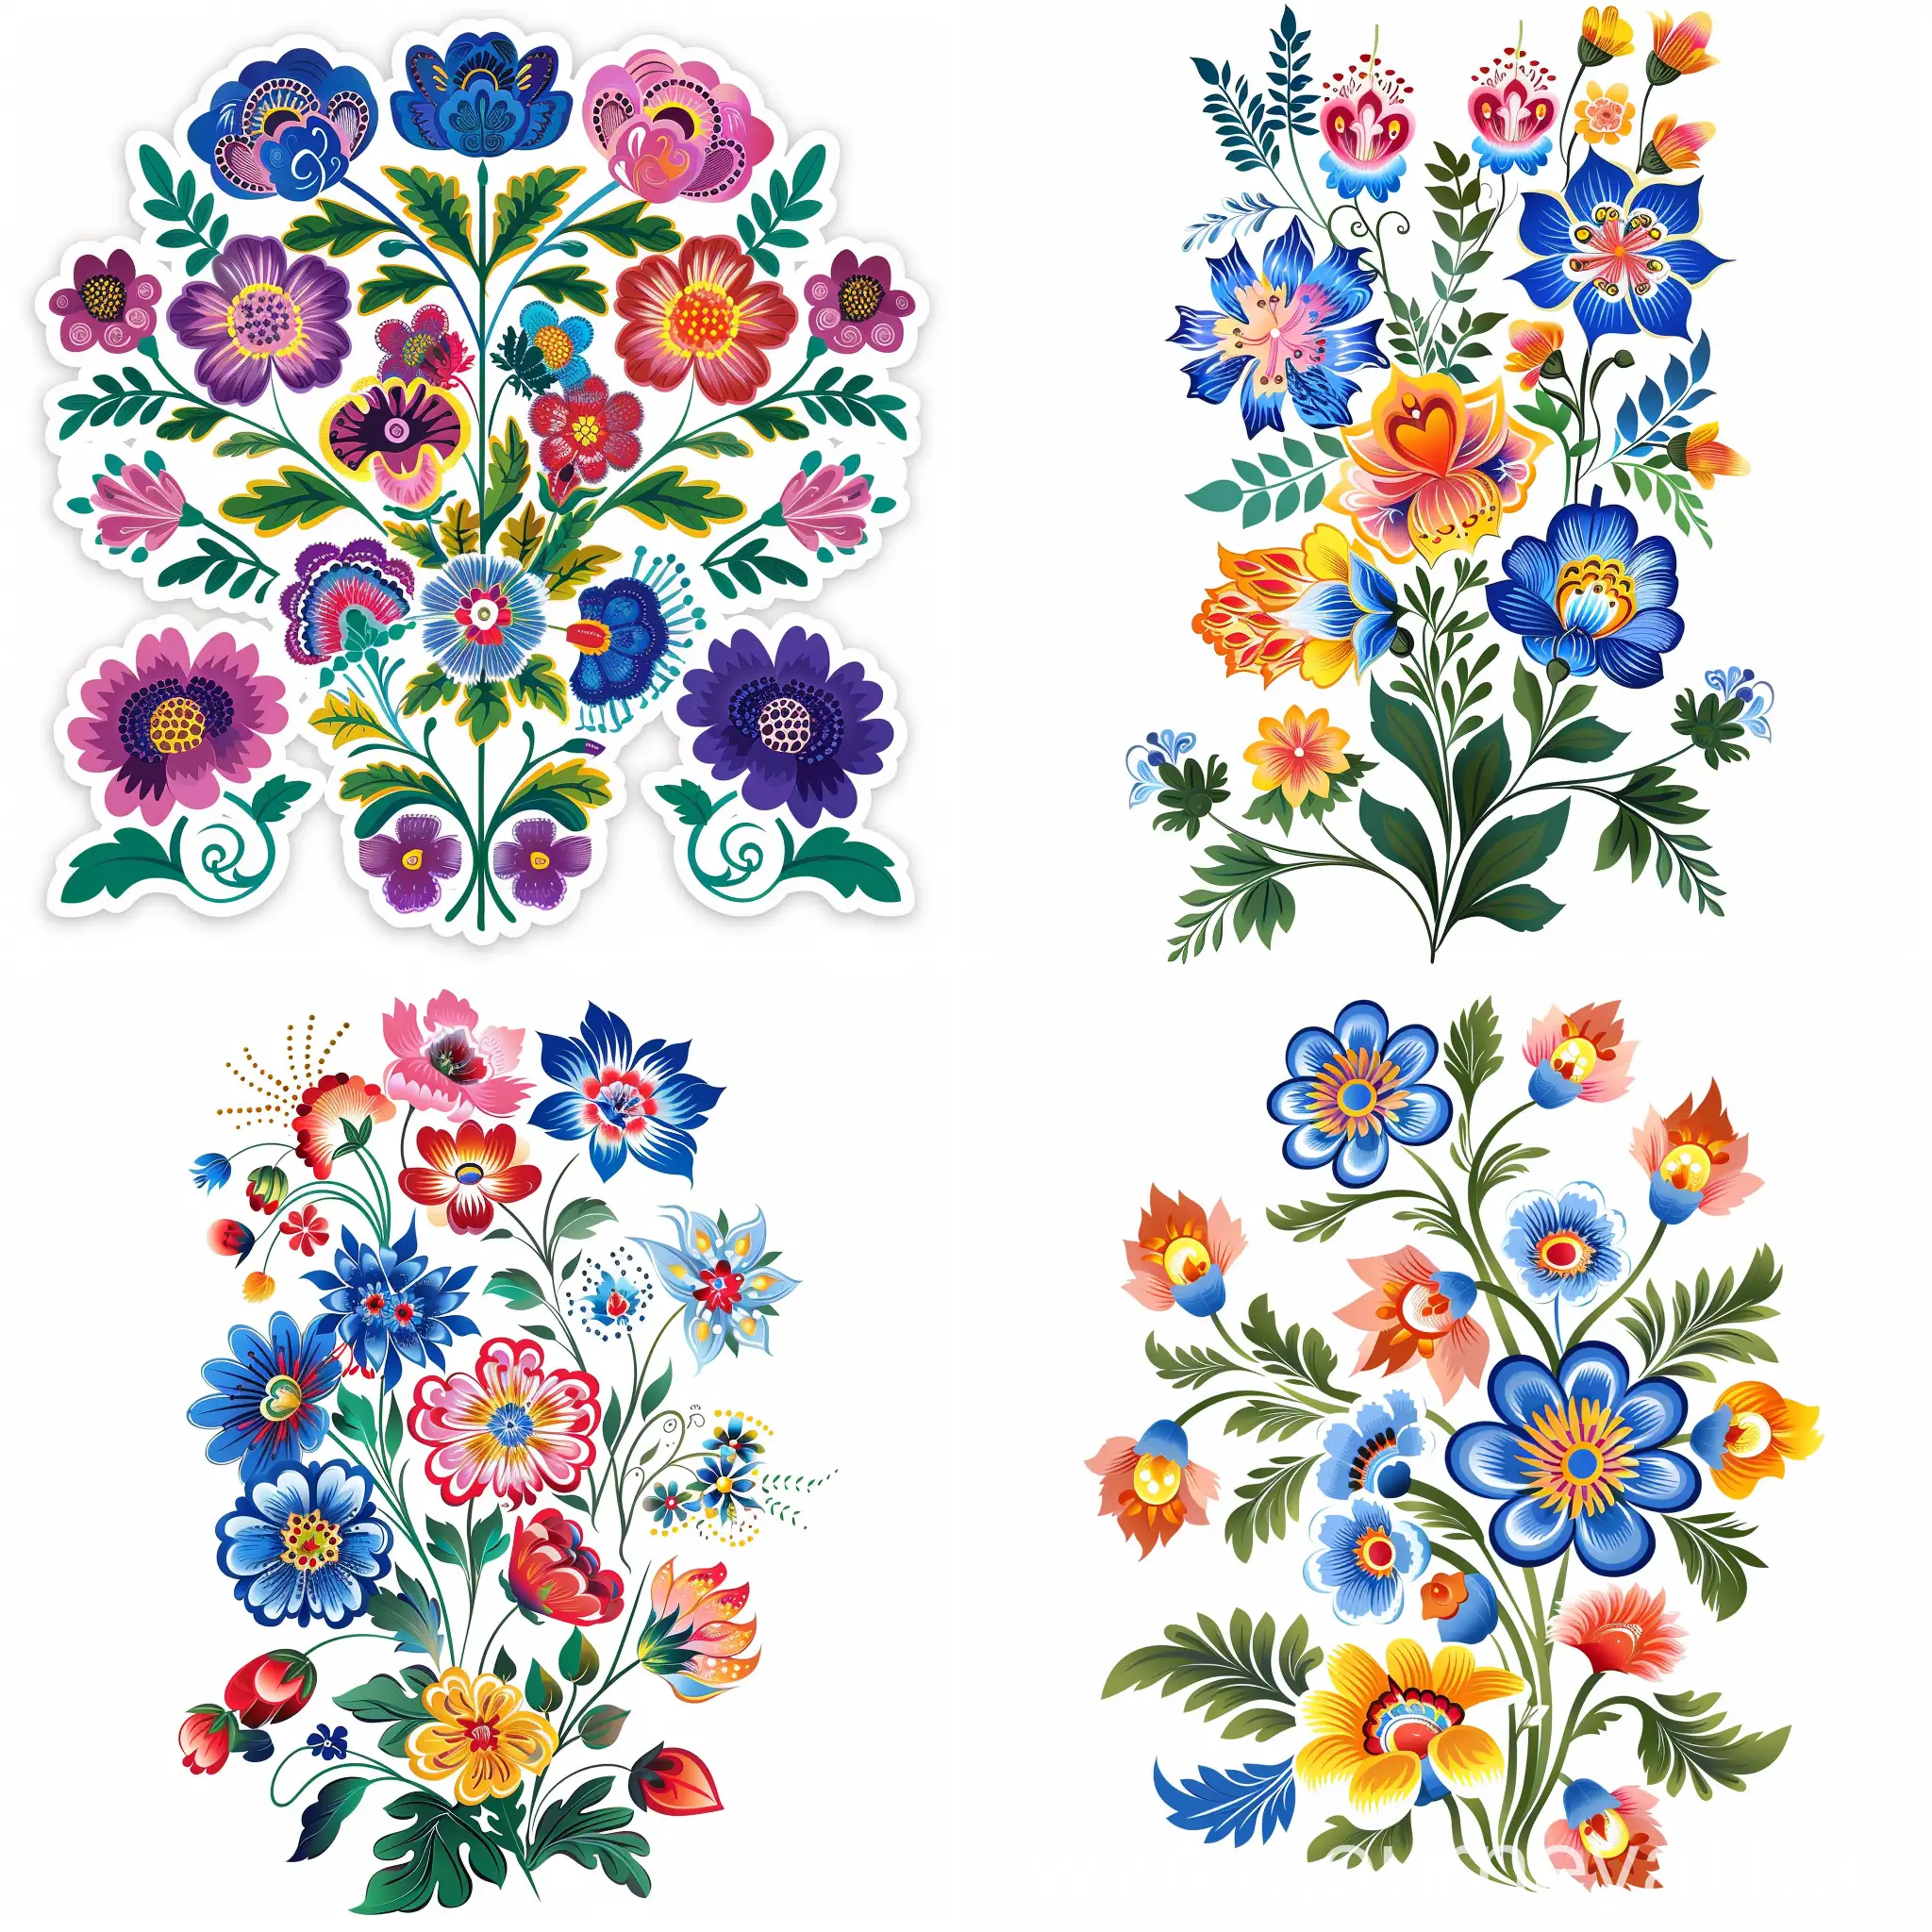 GzhelStyle-Flower-Stickers-with-Flat-Design-Aesthetic